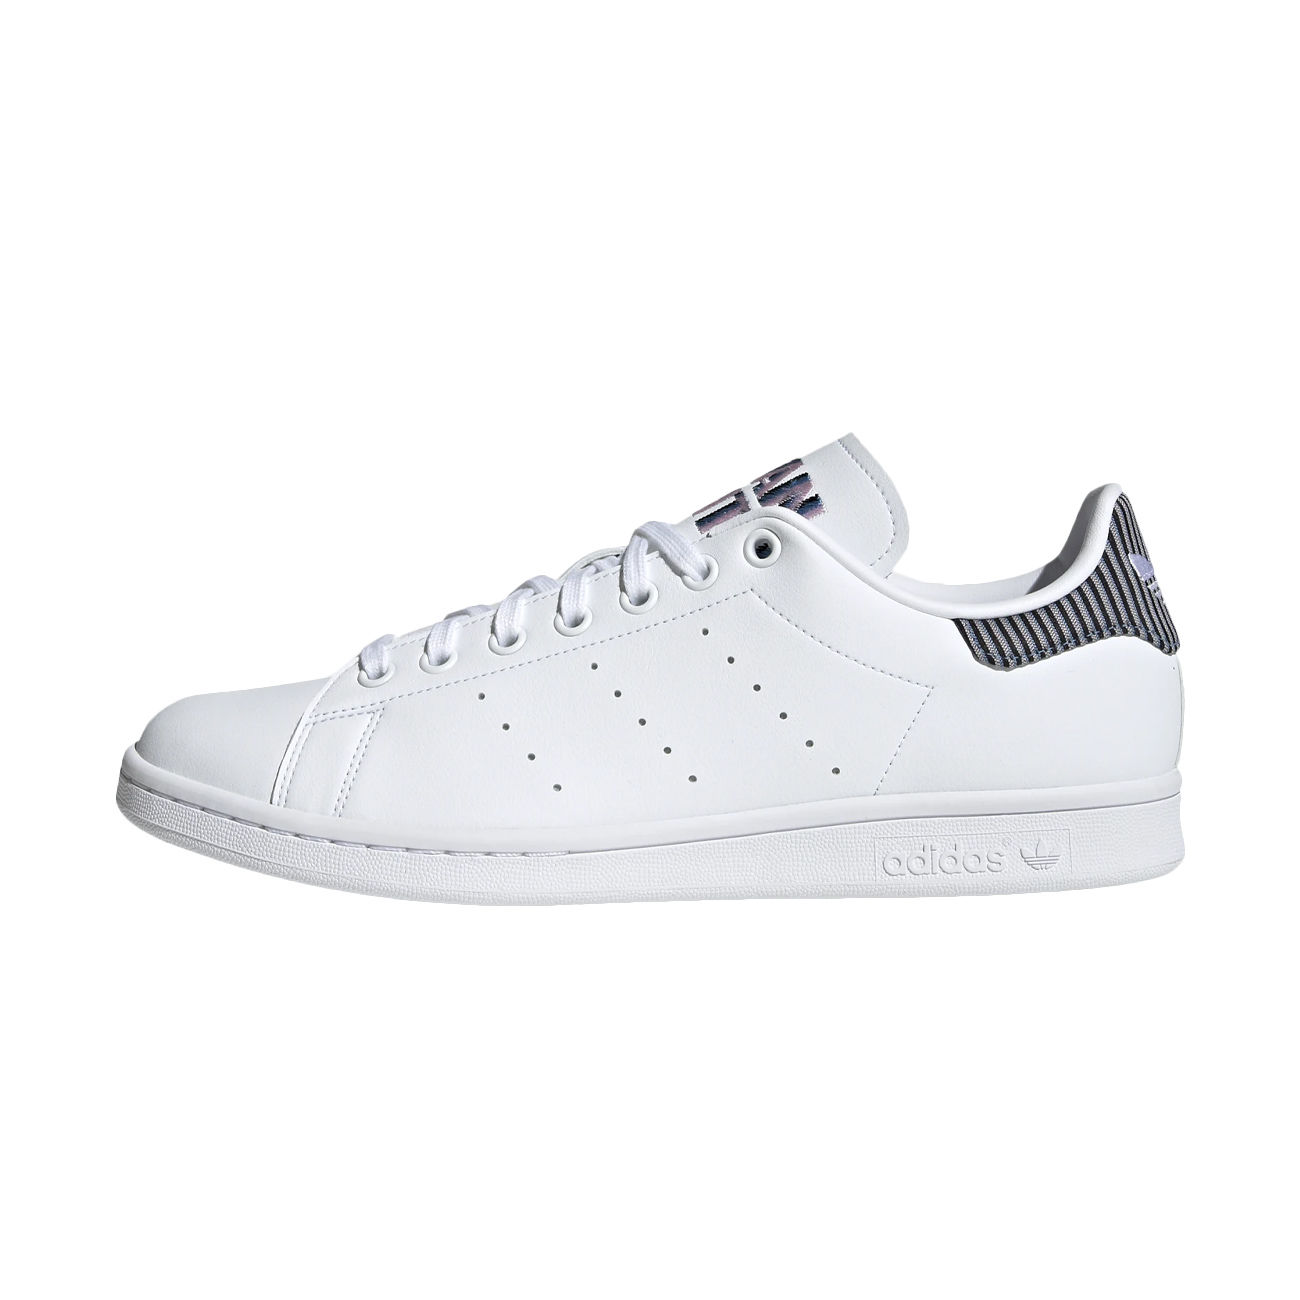 ADIDAS STAN SMITH SNEAKERS Unisex White Light Blue Clear Pink | Mascheroni Store